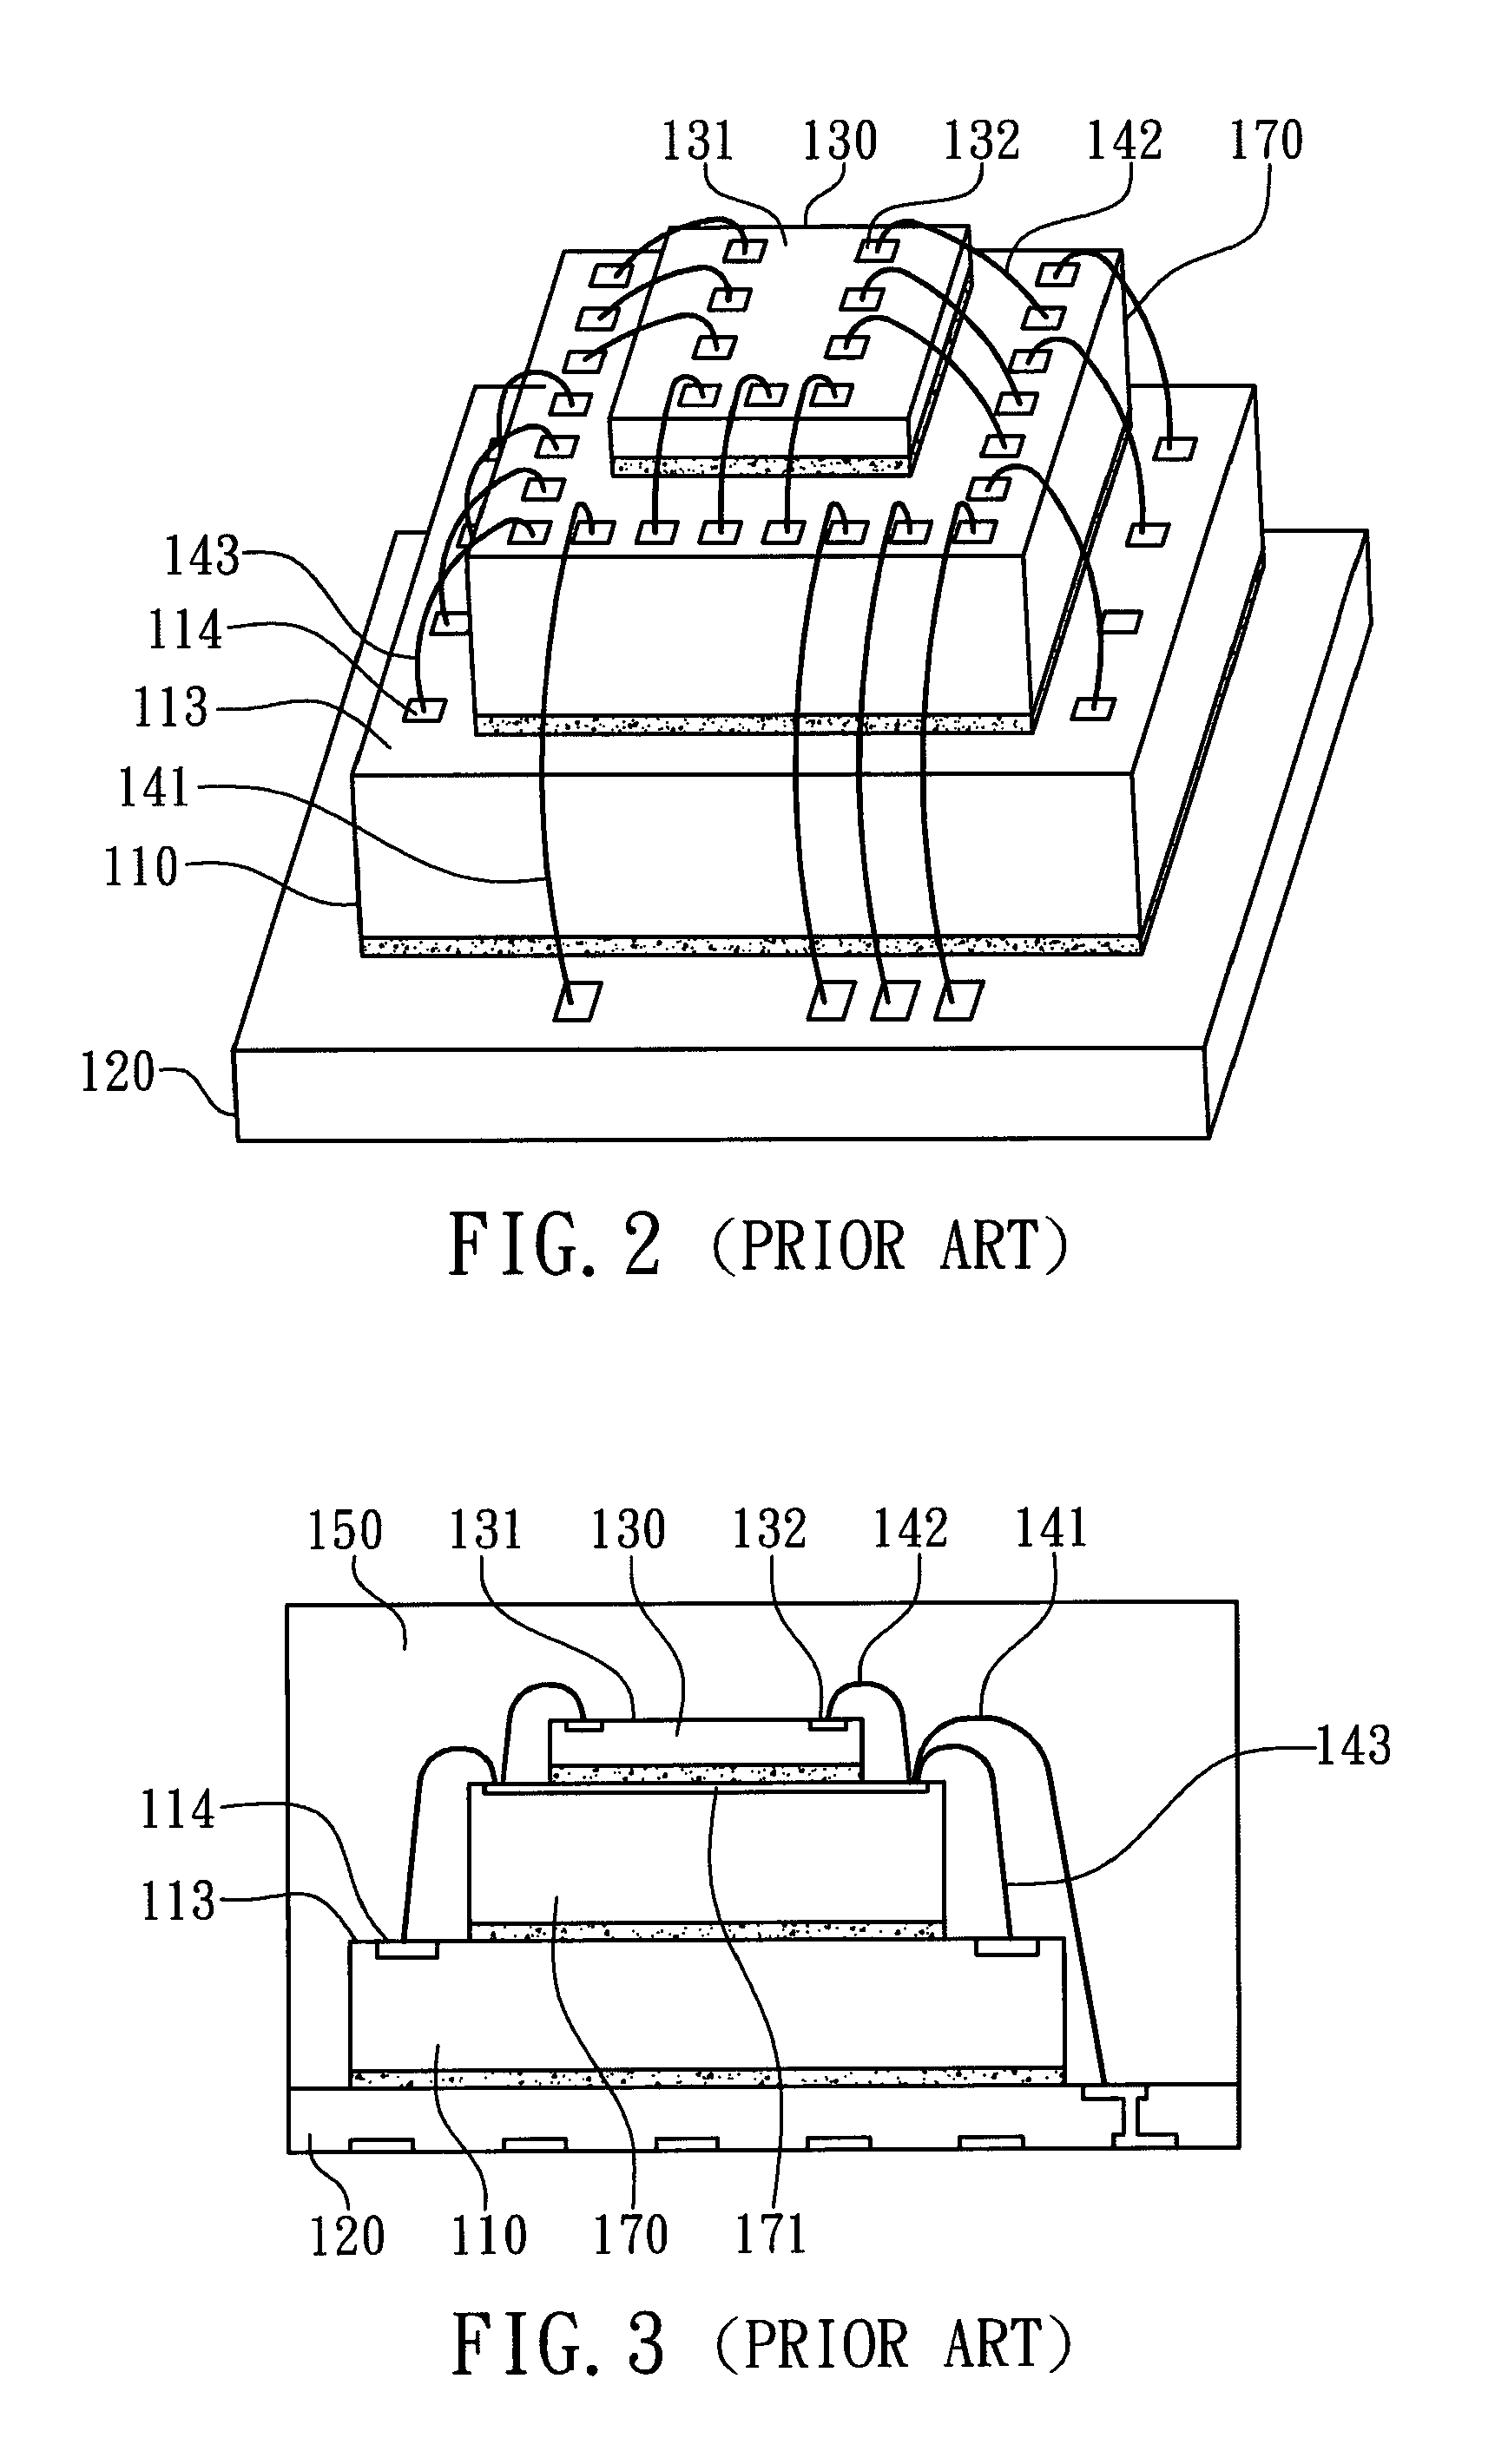 Semiconductor packaging method to save interposer